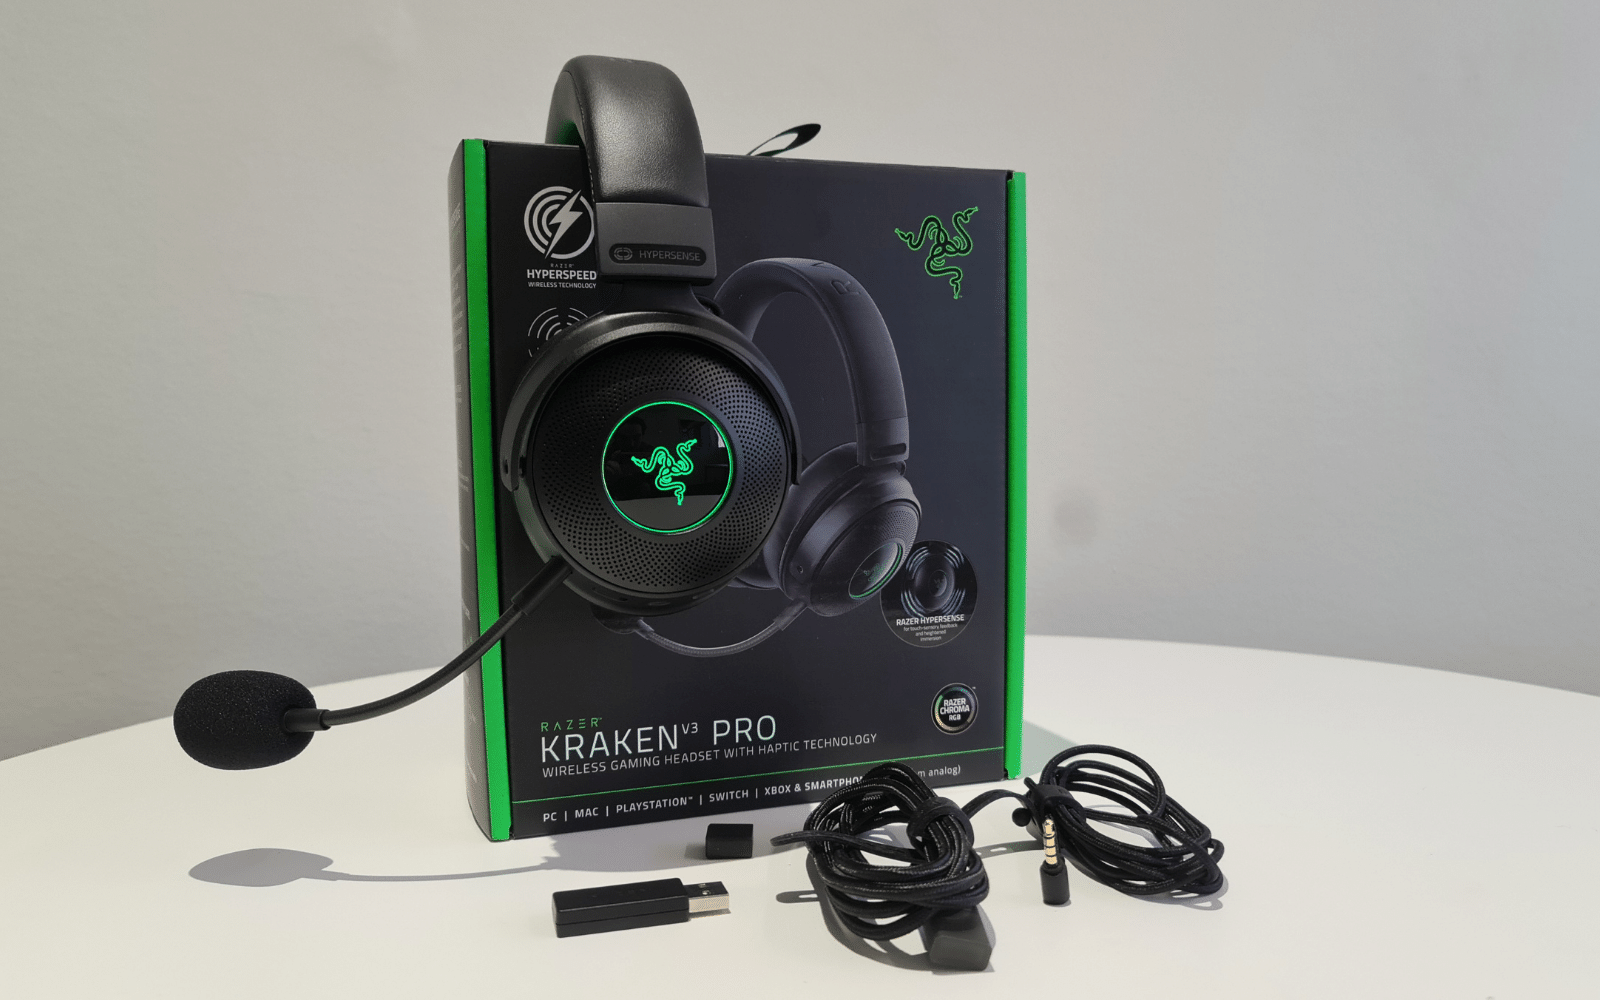 Razer Kraken V3 Pro Review - Decent Gaming Cans, Even Without The Gimmick -  Stuff South Africa